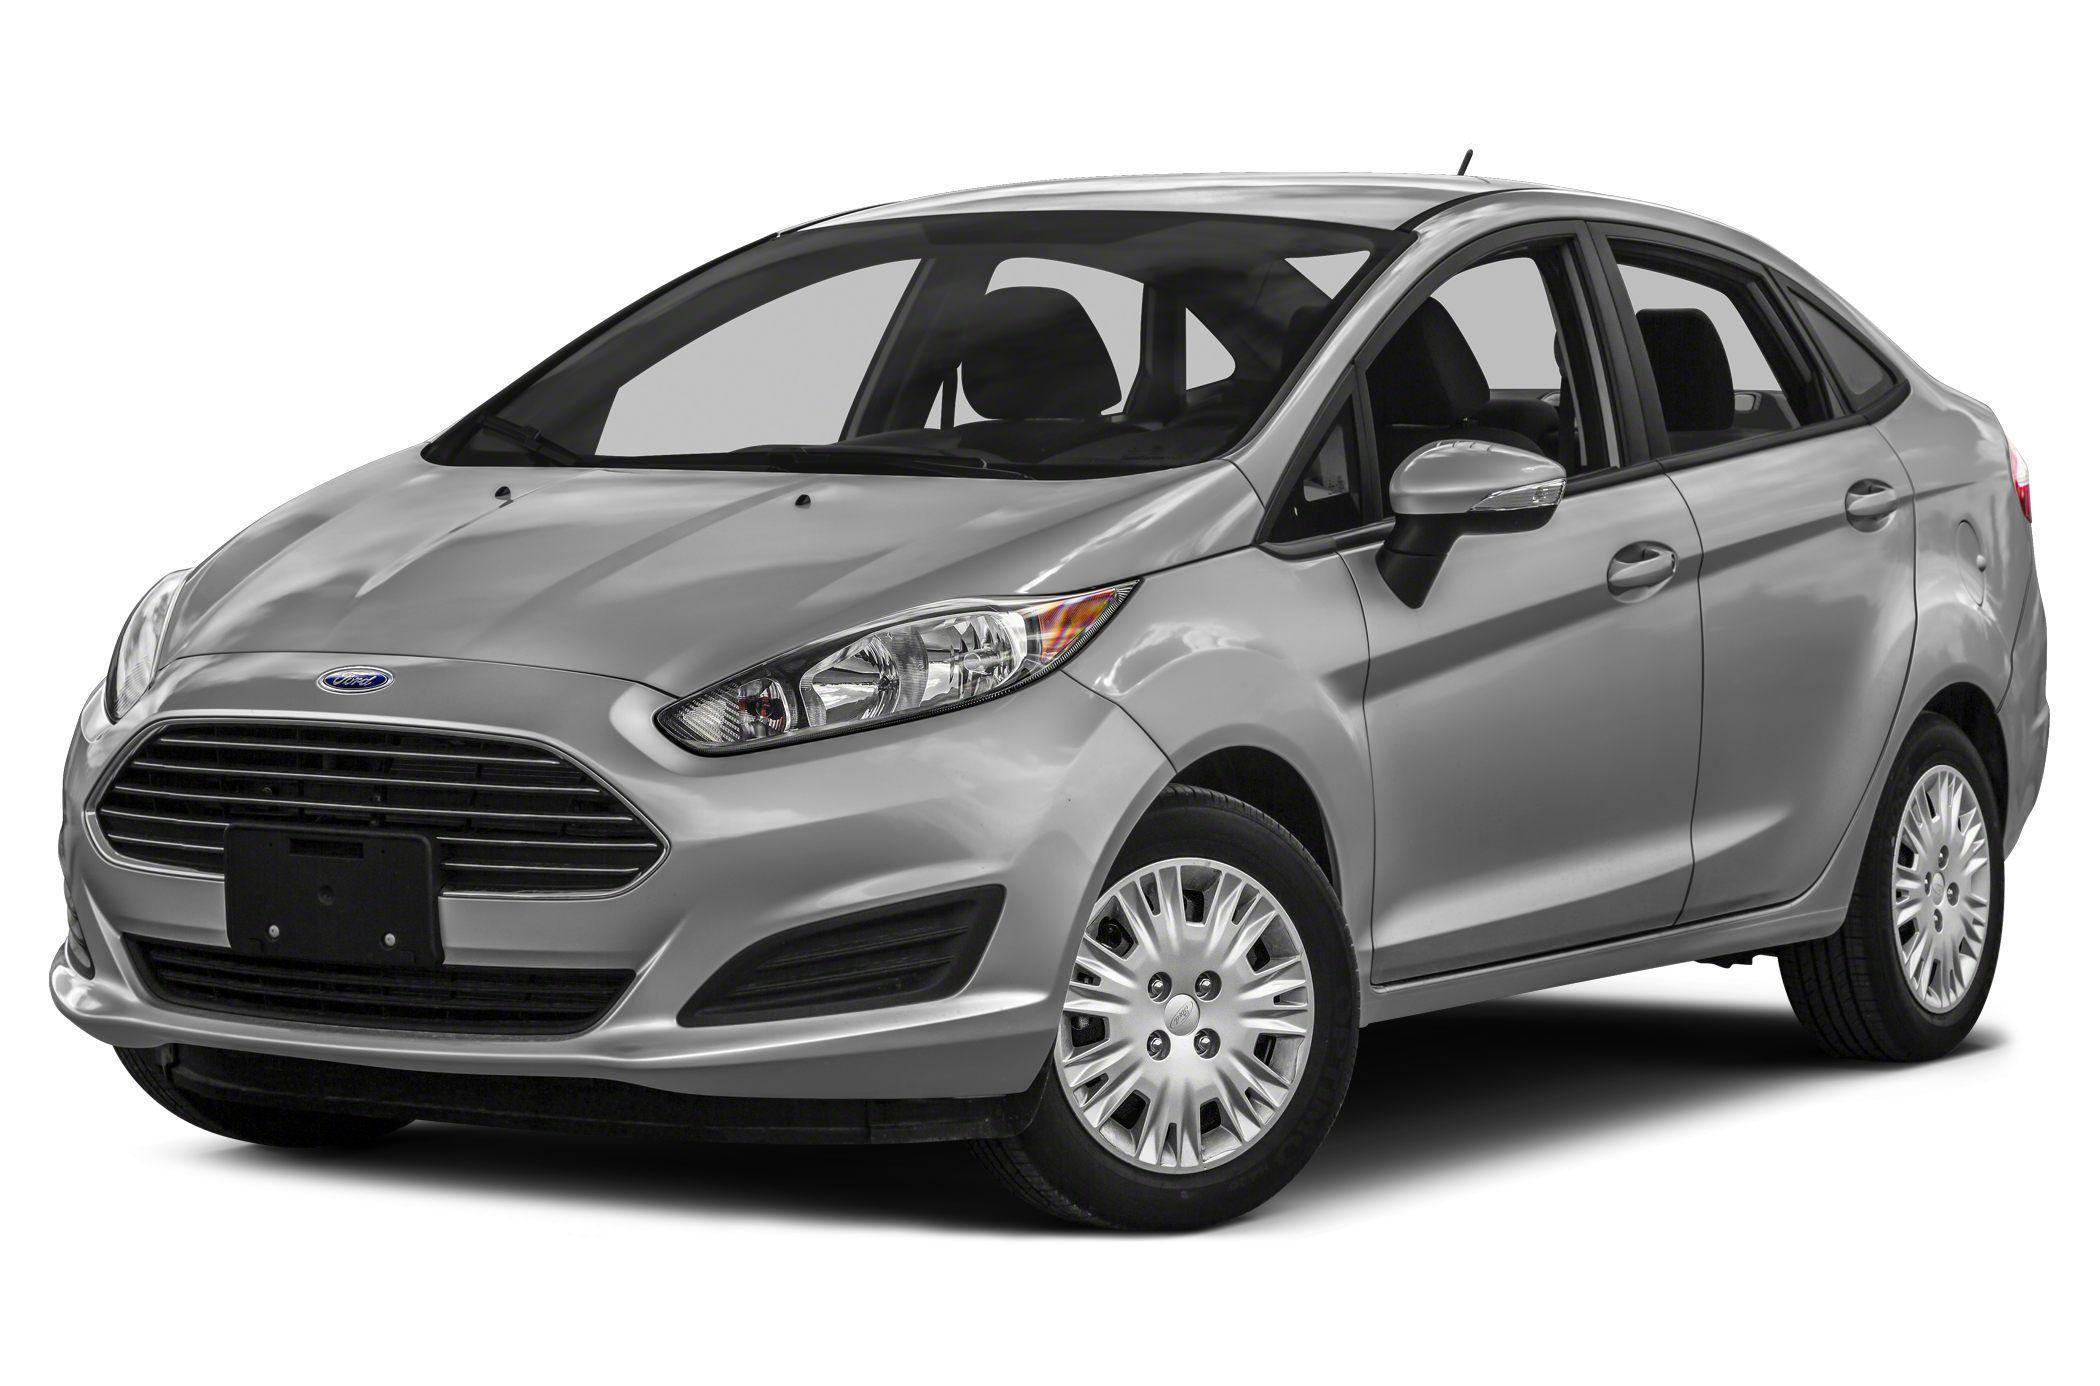 Ford Fiesta Wallpaper Image Photo Picture Background